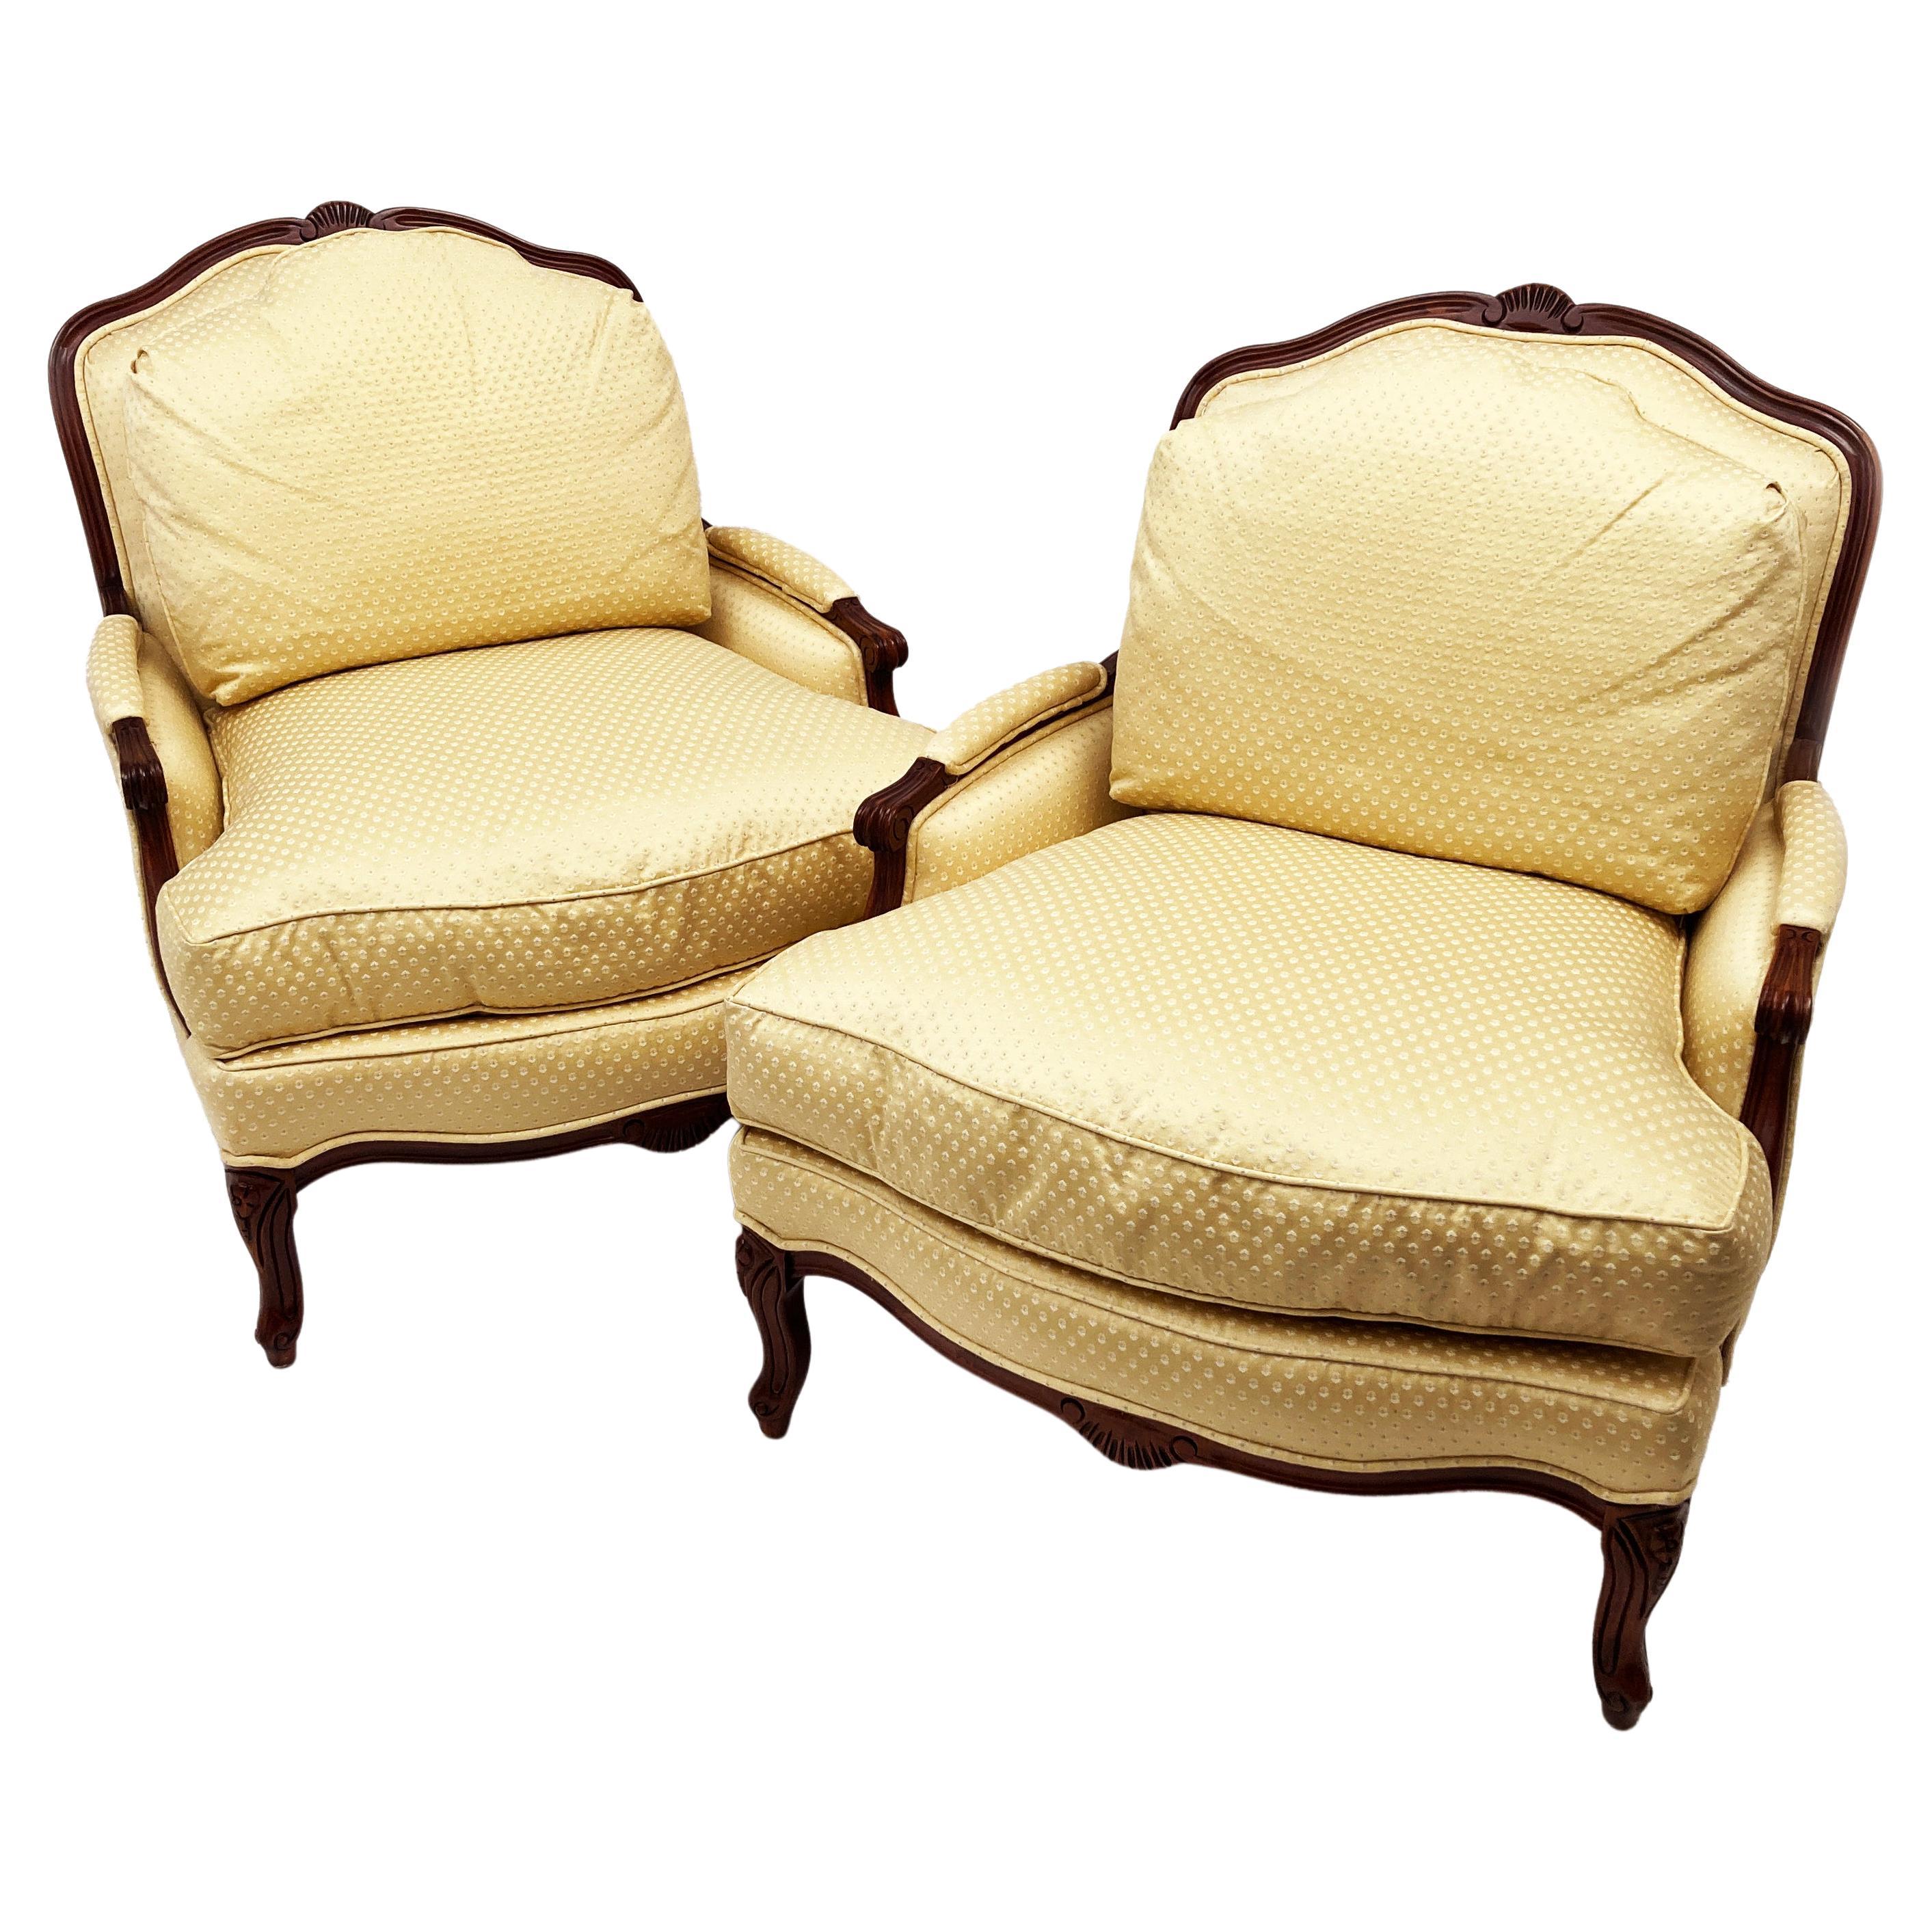 20th Century Bergere French Provincial Mahogany Upholstered Chairs - a Pair